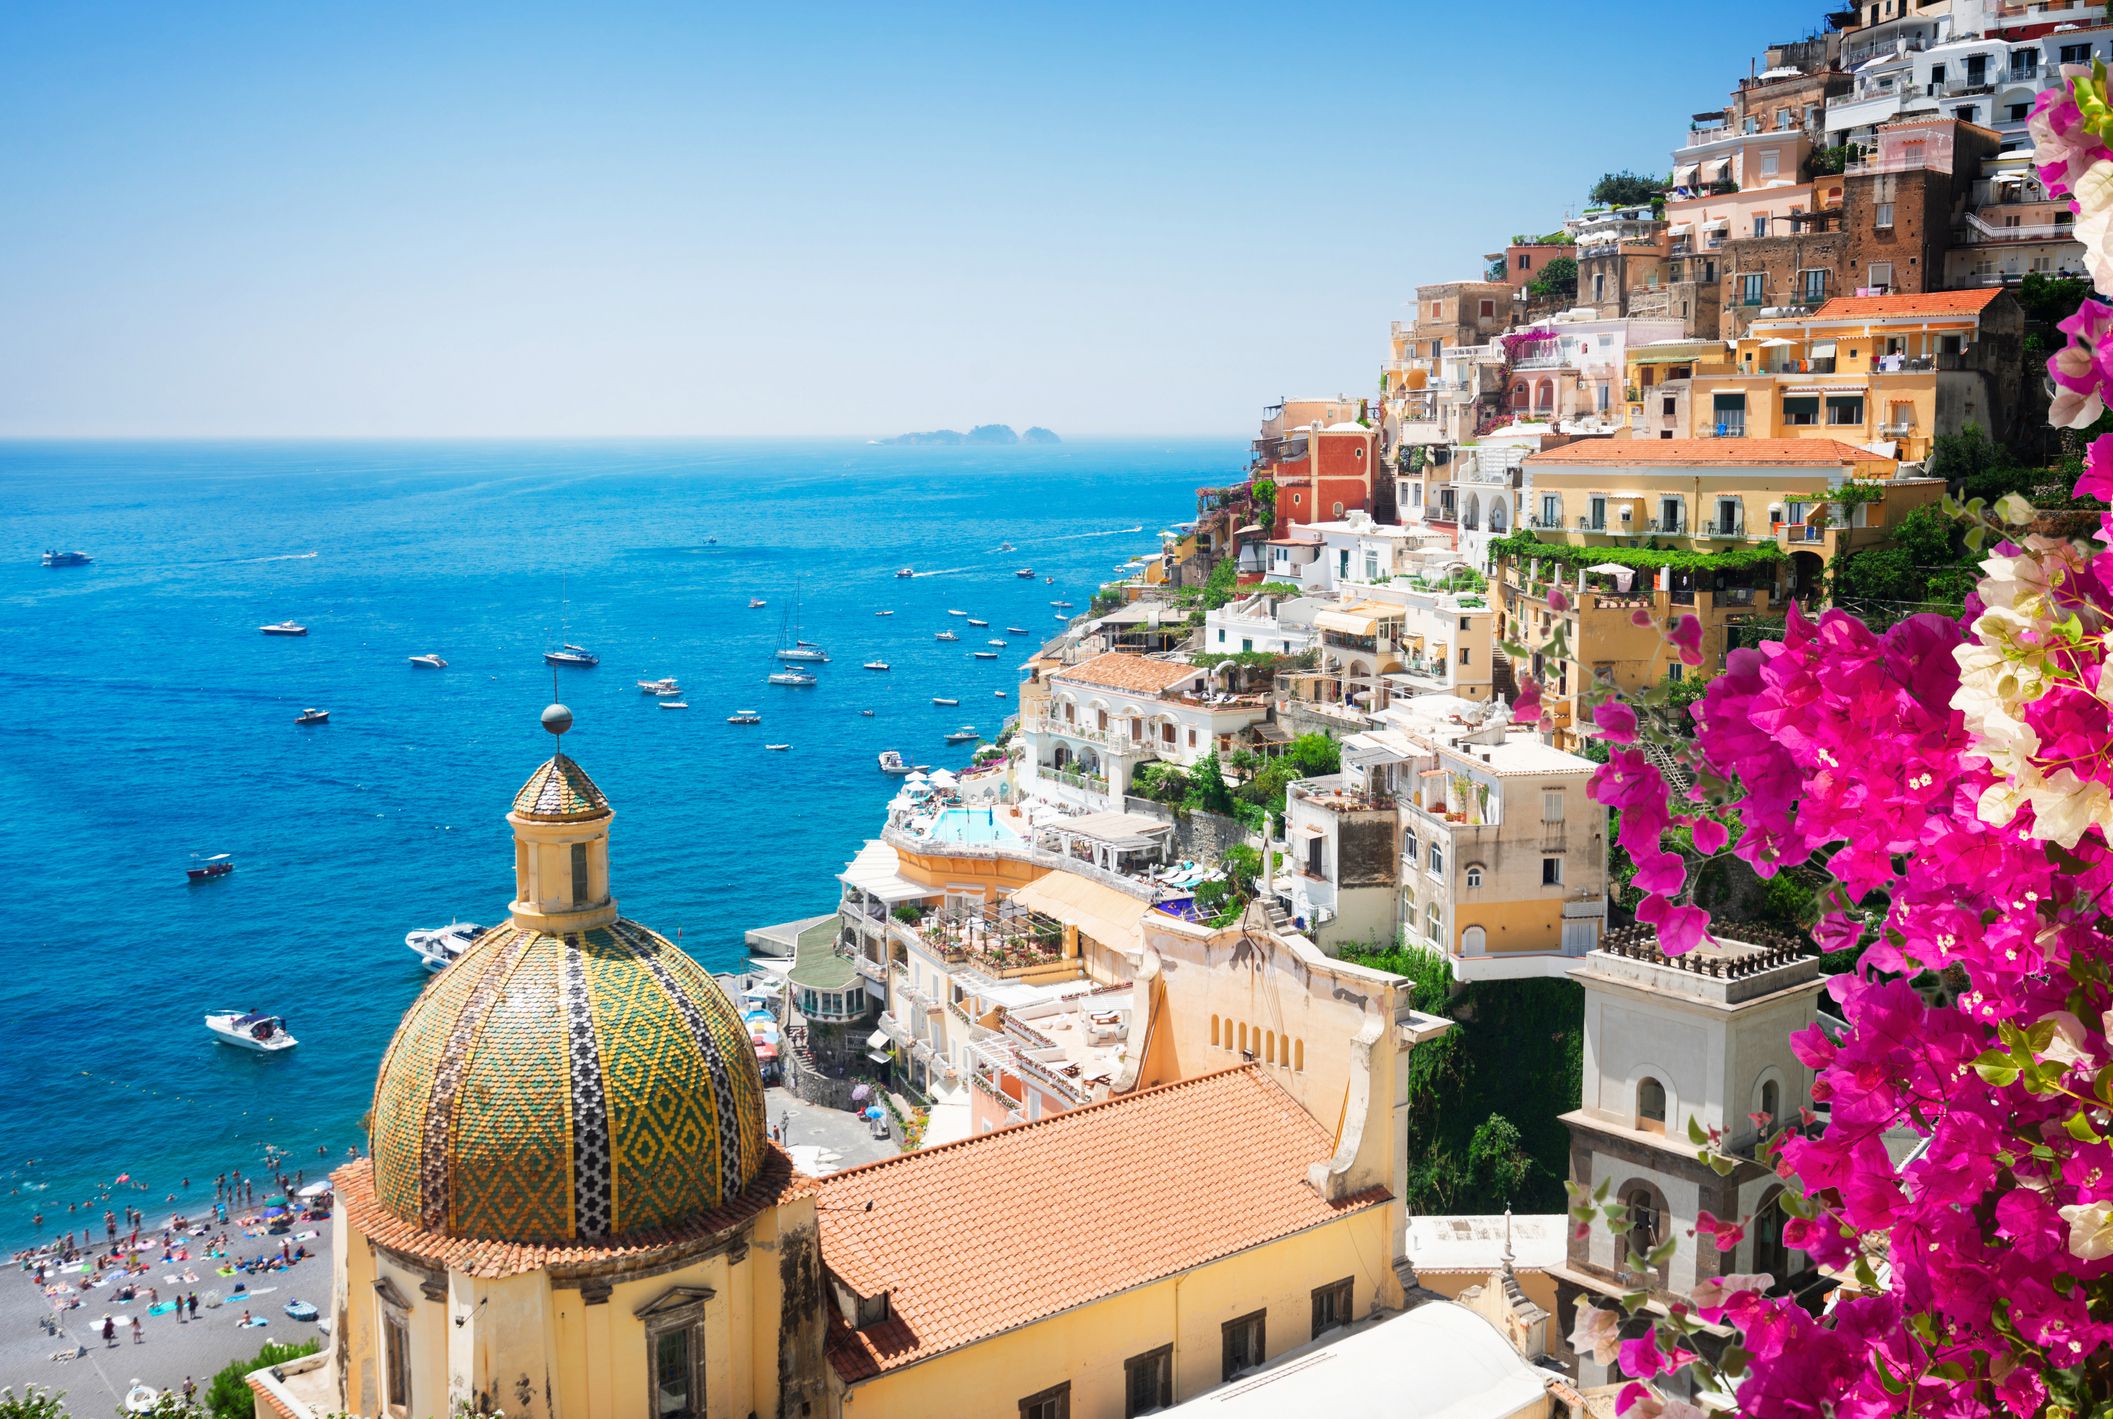 <p>Italy boasts the best beach and coastal towns anyone would dream of calling home. This country has so many great areas to live in, it can take months to research all the coastal towns of Italy. So we compiled a list of the best beach towns to live in Italy that are recommended by expats. From Sardinia in the South to Friuli-Venezia Giulia in the North, there are so many beautiful coastal towns in Italy to choose from, it’s not easy to decide.</p><p>This is exactly why we handpicked 22 of the best coastal towns in Italy to check out for your move abroad. From picture-perfect villages nestled on hilltops to lively beach cities with buzzing nightlife, there’s something for everyone. So whether you’re looking for a sun-drenched, relaxed town where you can be a beach bum all year long or a fun coastal town with breathtaking cliffs plunging out from the sea, dotted with trendy restaurants and nightlife spots, there is something for everyone looking for that perfect location to <a href="https://mydolcecasa.com/how-to-get-an-italy-visa-residency-and-italian-citizenship-a-quick-guide/">move to Italy</a>.</p><p>If you’re looking for stunning scenery and sunny weather, then look no further than Italy’s gorgeous coastal towns. <a href="https://mydolcecasa.com/cheapest-regions-to-buy-a-home-in-italy/">From Sicily to Liguria</a>, not only will you be able to find a town that speaks to your heart, but you will get to enjoy understated beaches, azure waters, and some of the most breathtaking views in all of Europe.</p><p>And let’s not forget about the food. Seafood lovers will feel at home here thanks to the incredibly fresh seafood available everywhere. The cuisine in the coastal towns of Italy is world-renowned for its health benefits, too, so eating well is easy when you’re living here.</p><p>Finding the best place to live in a new country can be daunting. But don’t worry, we’re here to help. Italy is a beautiful country with <a href="https://mydolcecasa.com/why-move-to-italy/">so much to offer</a>, and there are plenty of great places to live in Italy for expats.</p><p><strong>Here are our top picks for the best beach and coastal towns in Italy:</strong></p>